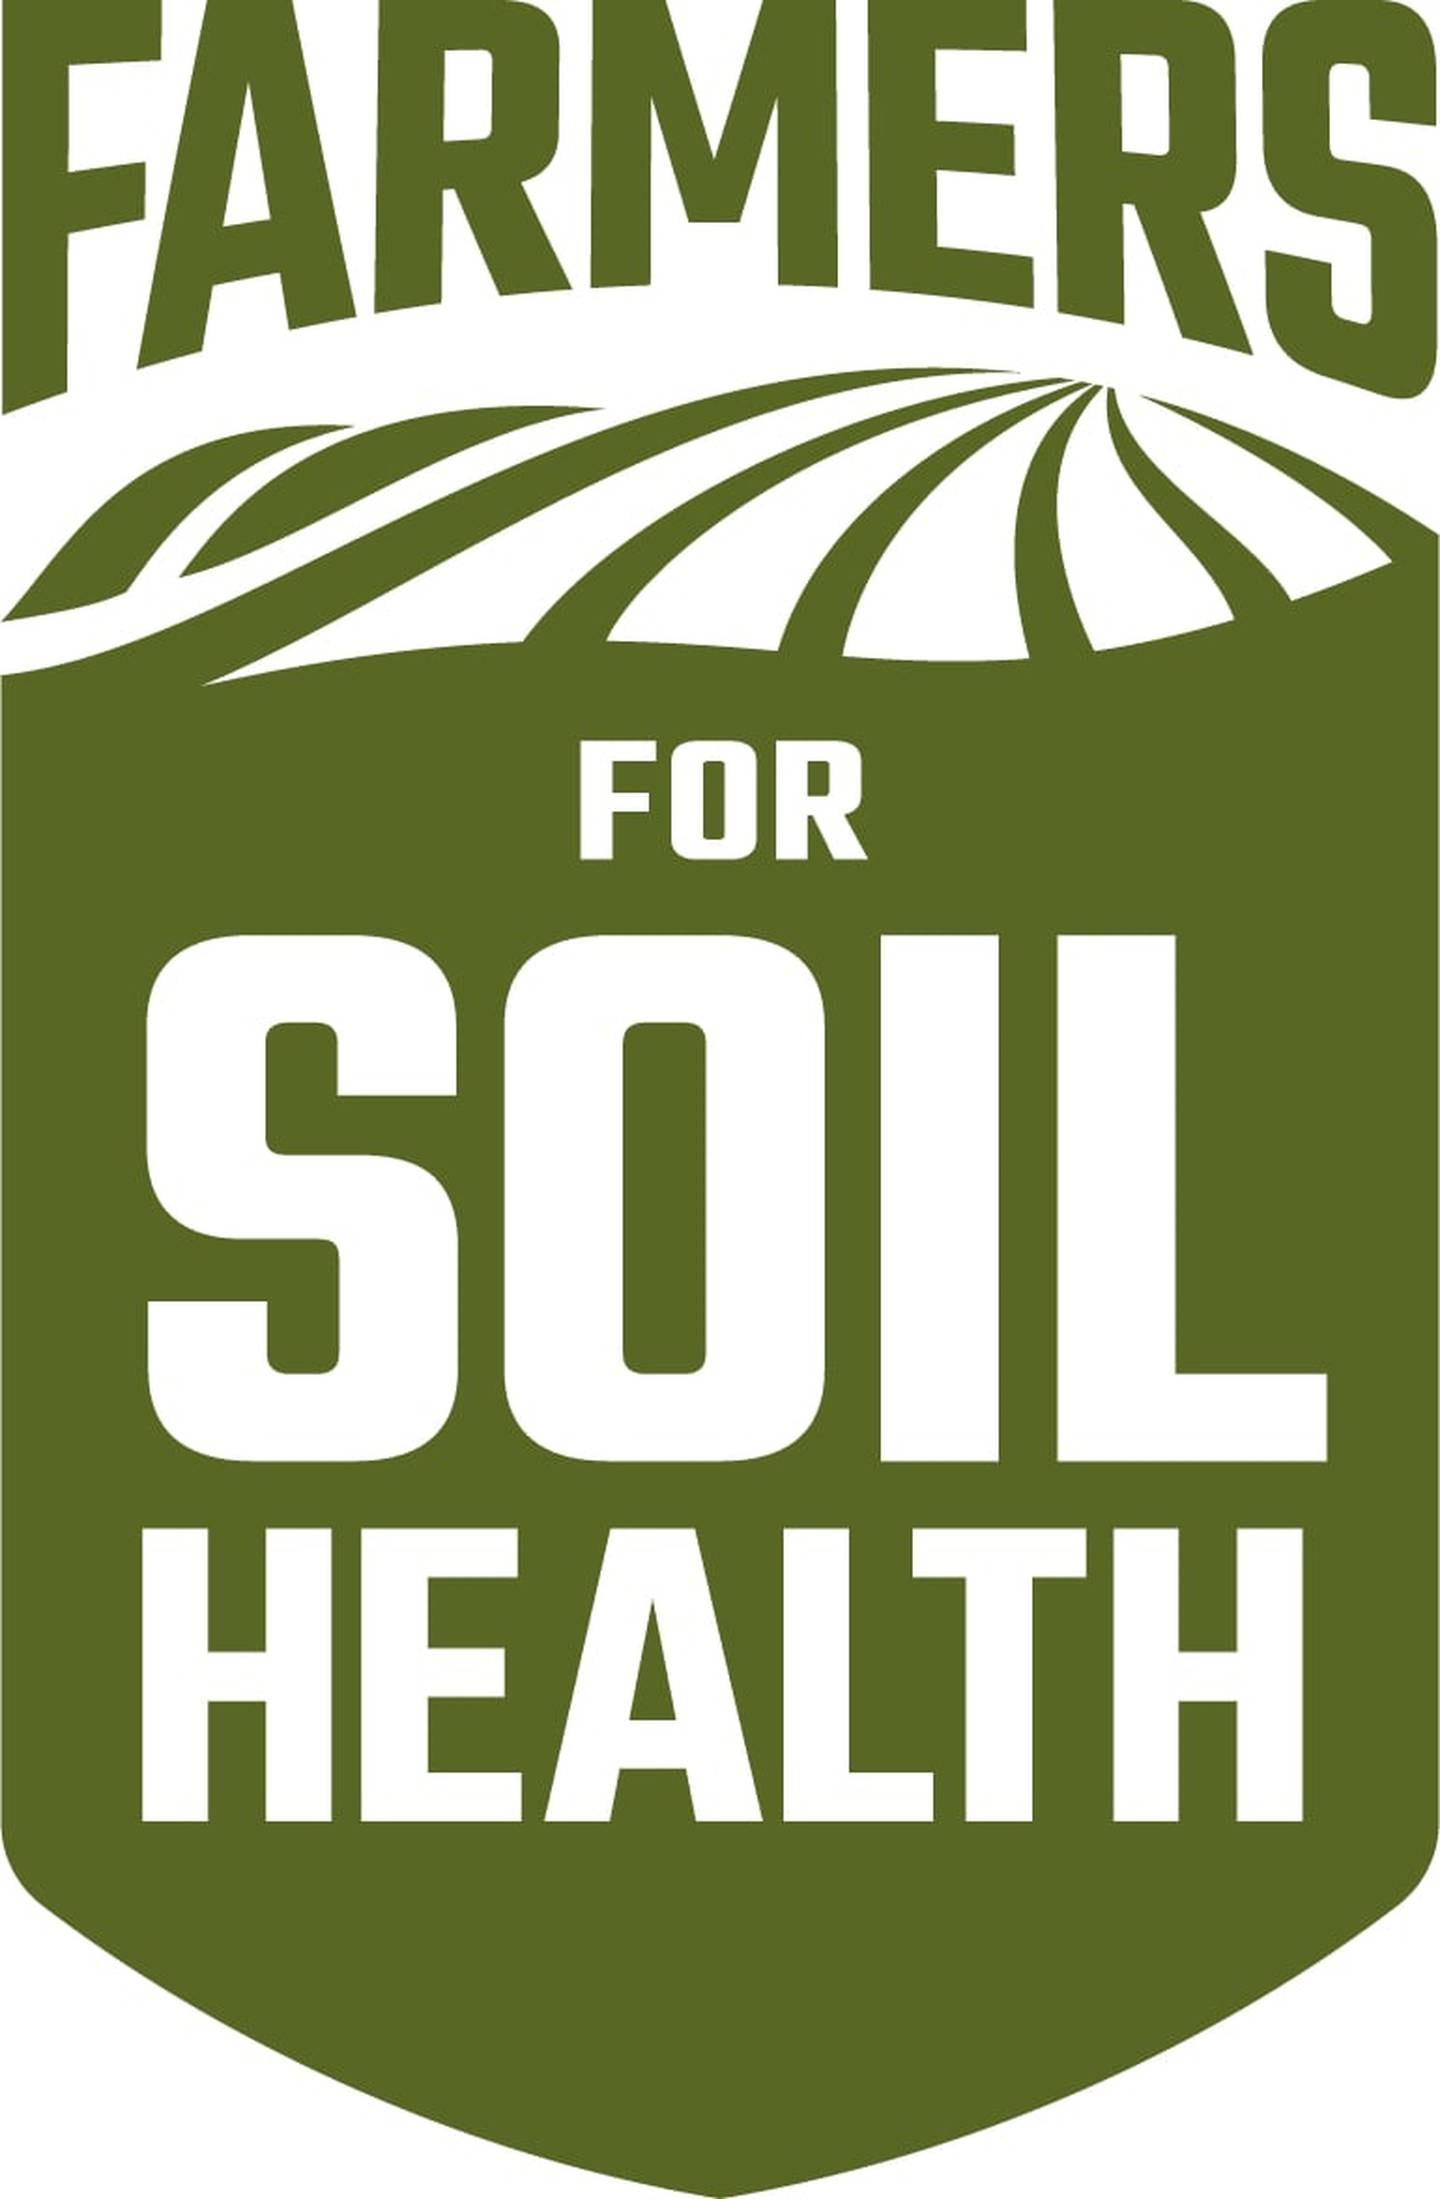 Farmers for Soil Health is a collaboration between the National Corn Growers Association, National Pork Board and United Soybean Board.